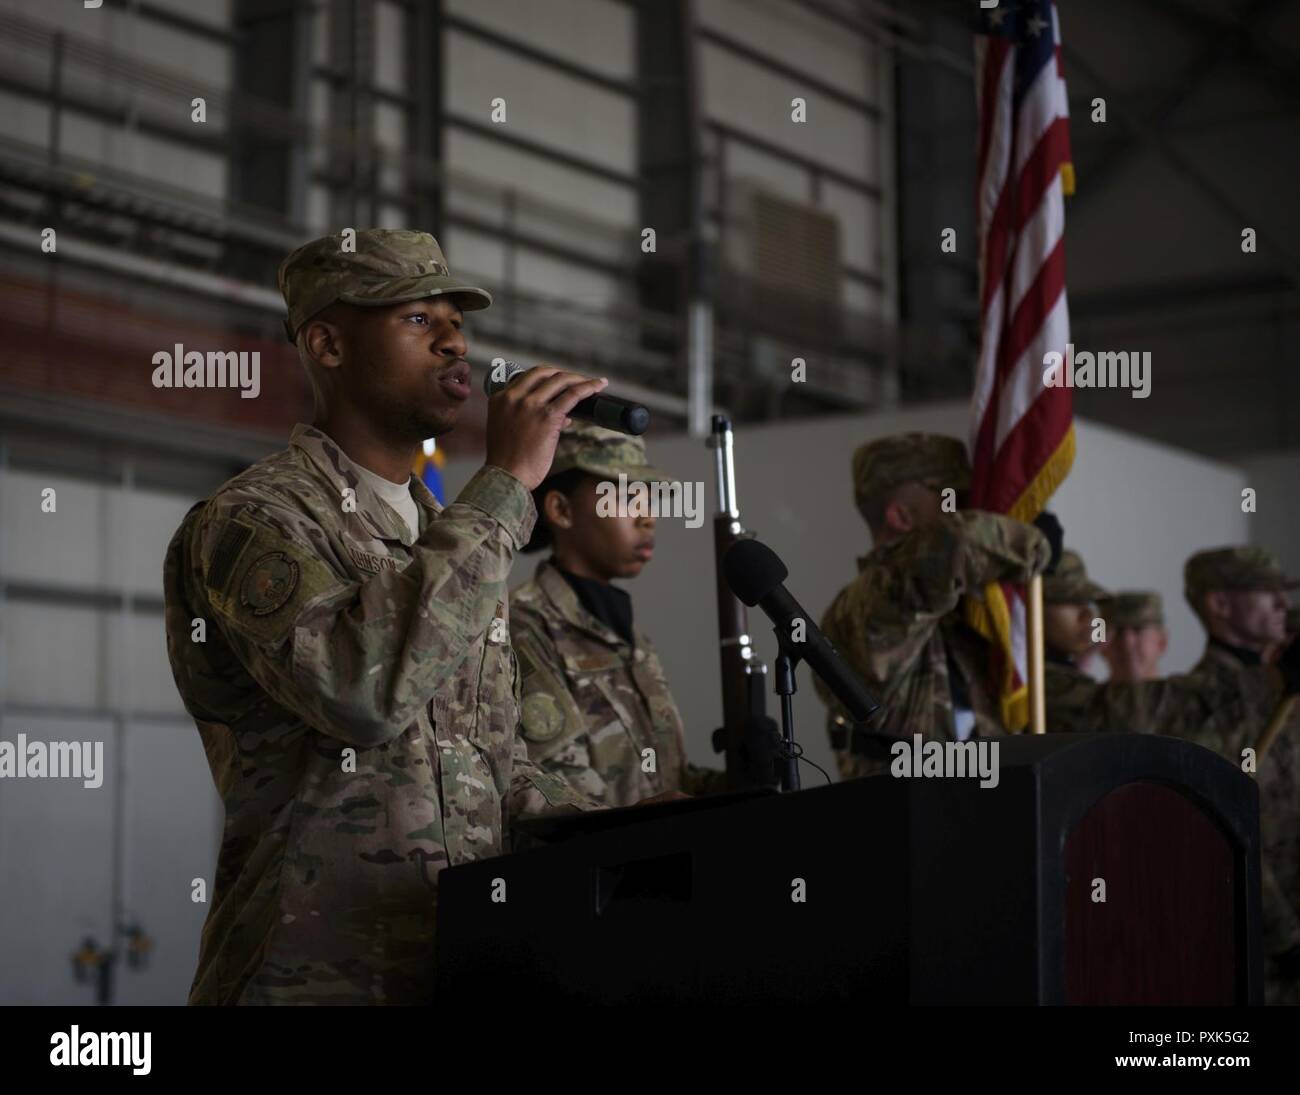 Senior Airman Calvin Johnson, 455th Expeditionary Security Forces Squadron, sings the national anthem during a change of command ceremony at Bagram Airfield, Afghanistan, June 3, 2017. During the ceremony, Brig. Gen. Jim Sears relinquished command of the 455th Air Expeditionary Wing to Brig. Gen. Craig Baker. Stock Photo